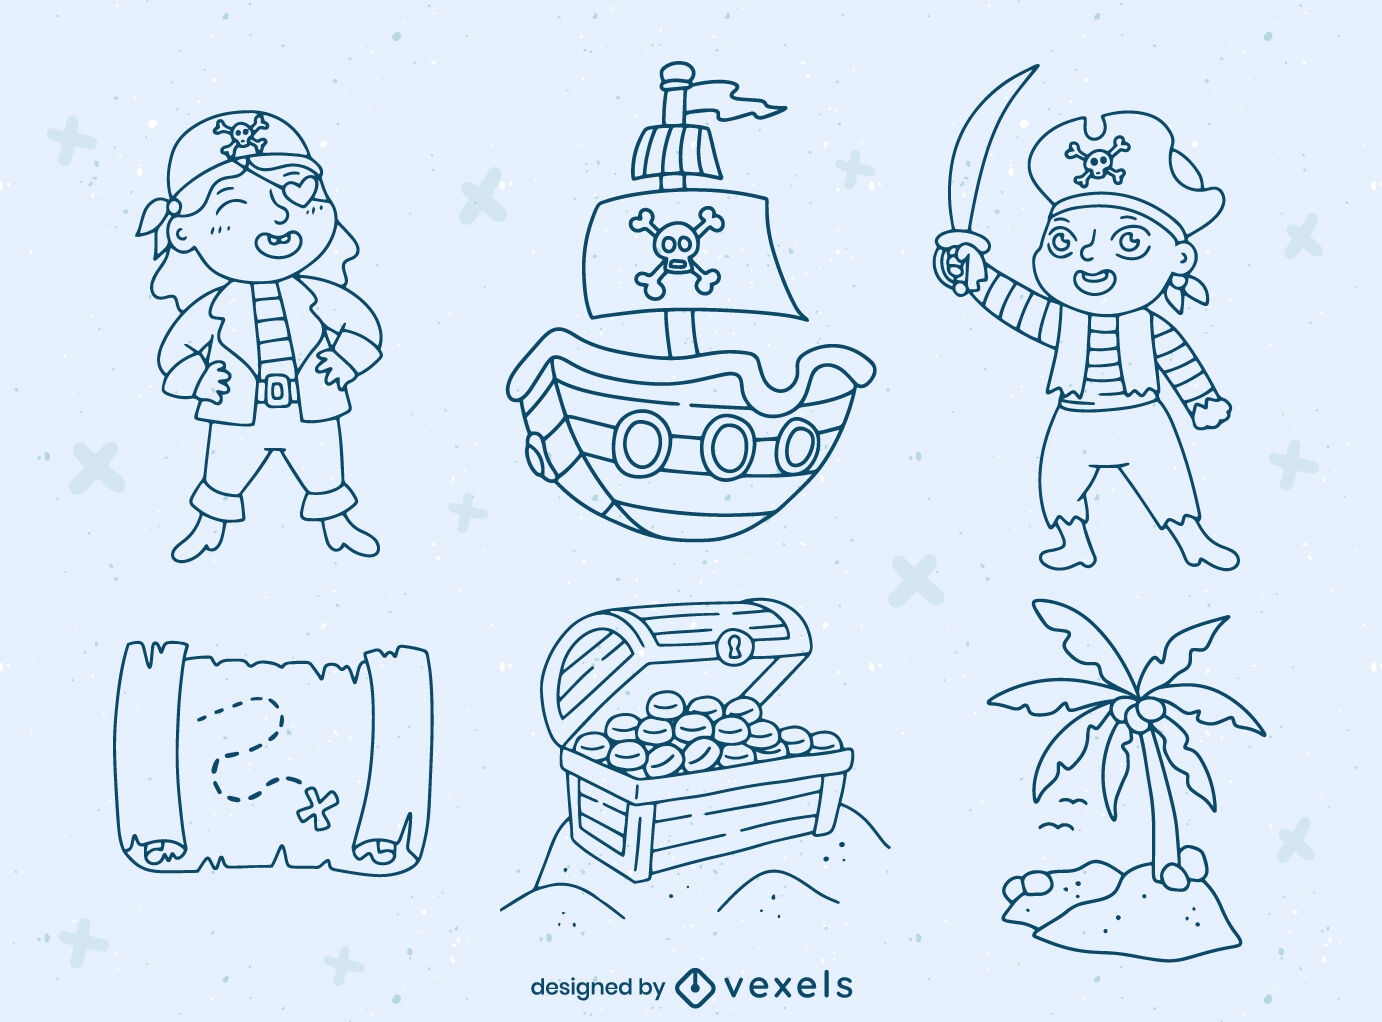 Pirate kids characters and elements set